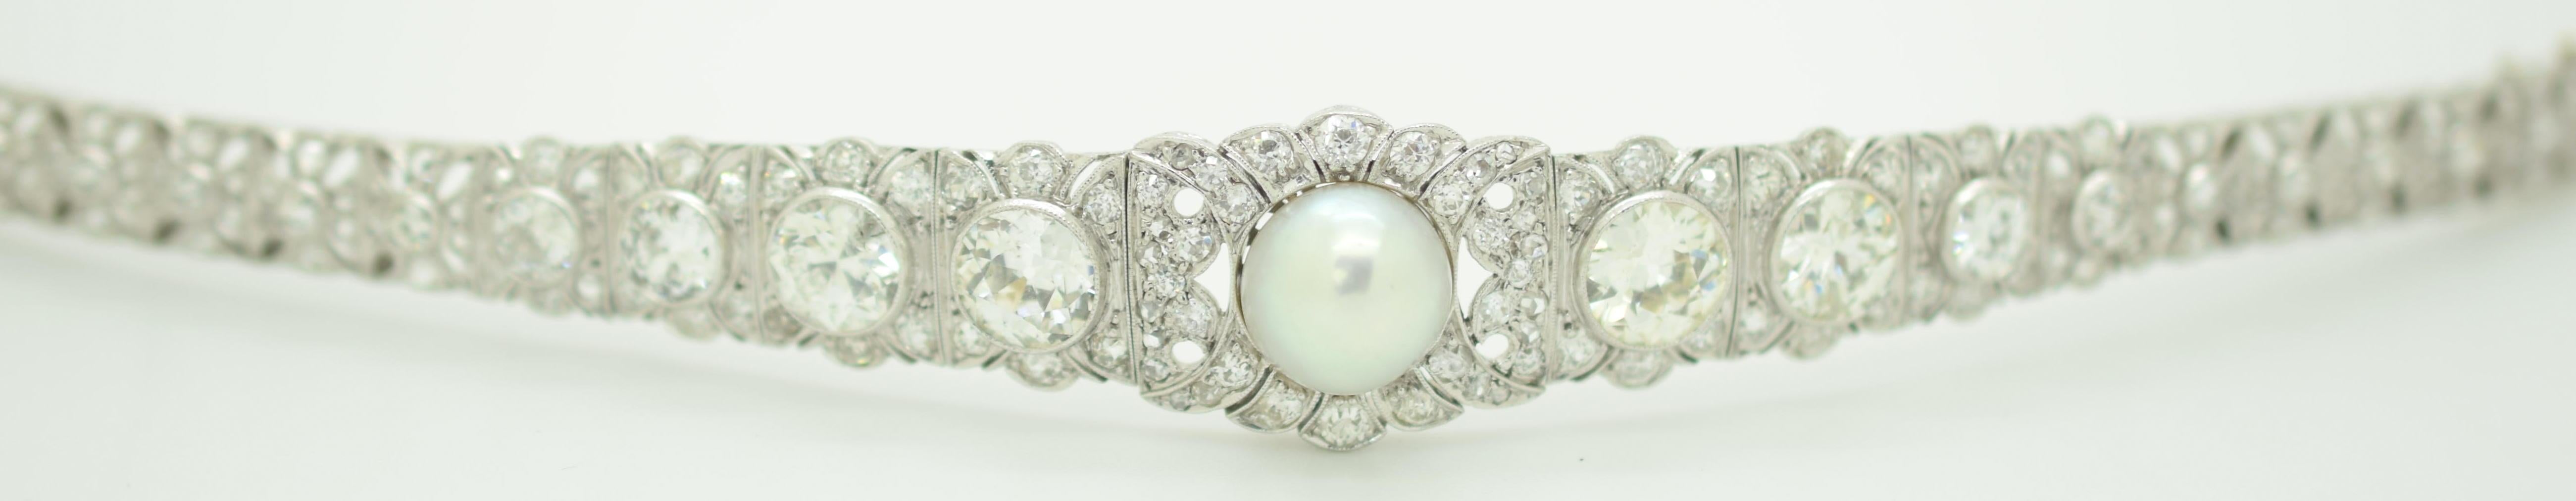 GIA Natural Pearl and Diamond Art Deco Bracelet.  The GIA report number is 2185523699. This bracelet is spectacular, the focal point of the bracelet is found front and center. One natural Salt Water Pearl measuring 10.31 x 10.01 mm. The pearl is